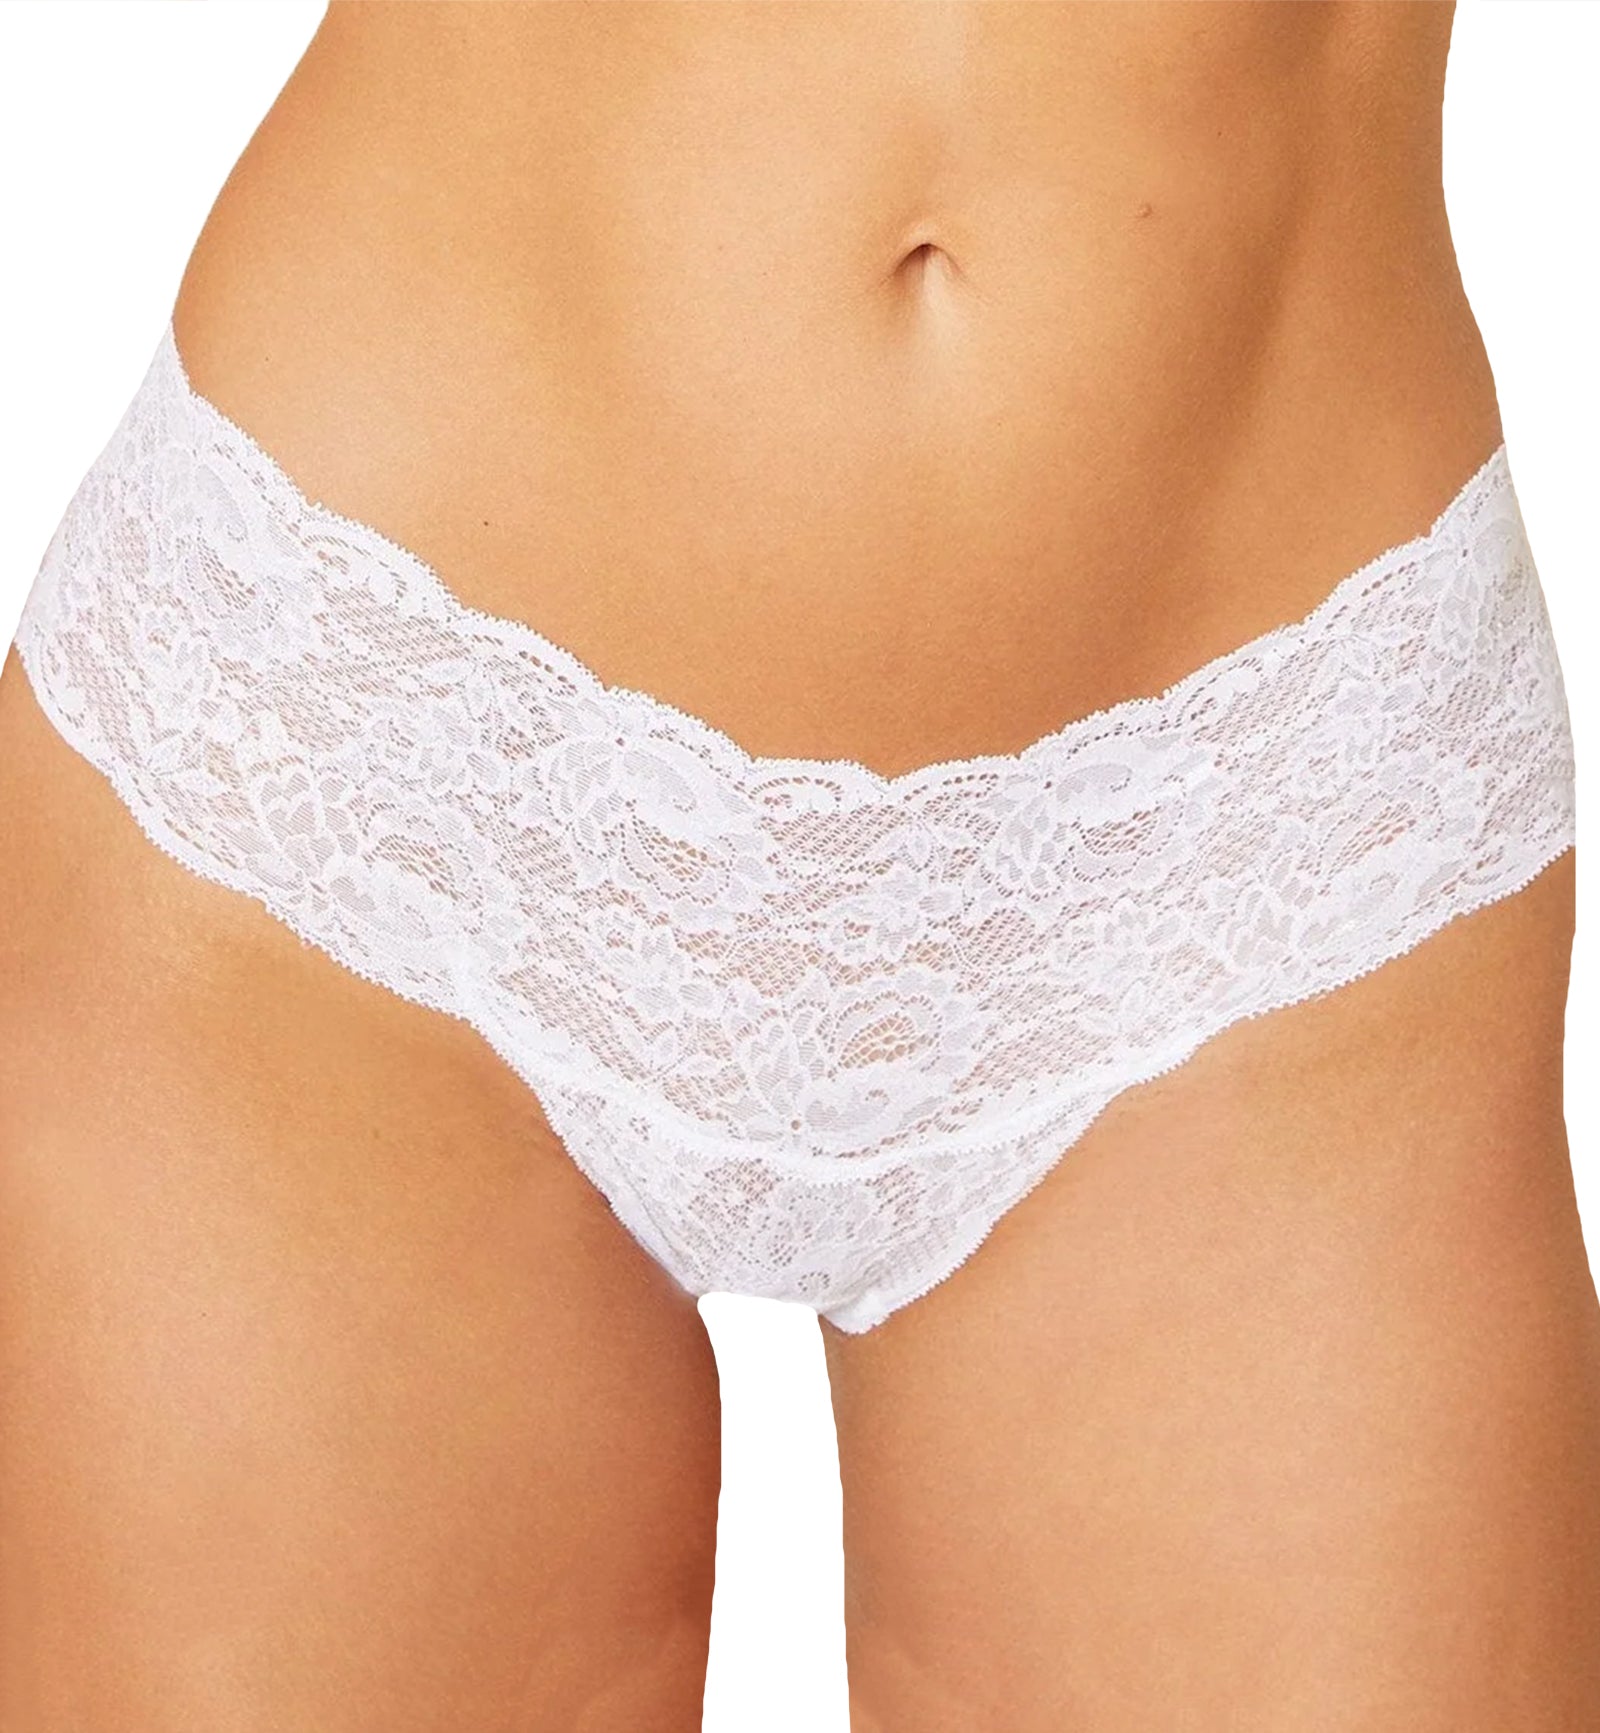 Cosabella Never Say Never Comfie Thong (NEVER0343),S/M,White - White,S/M